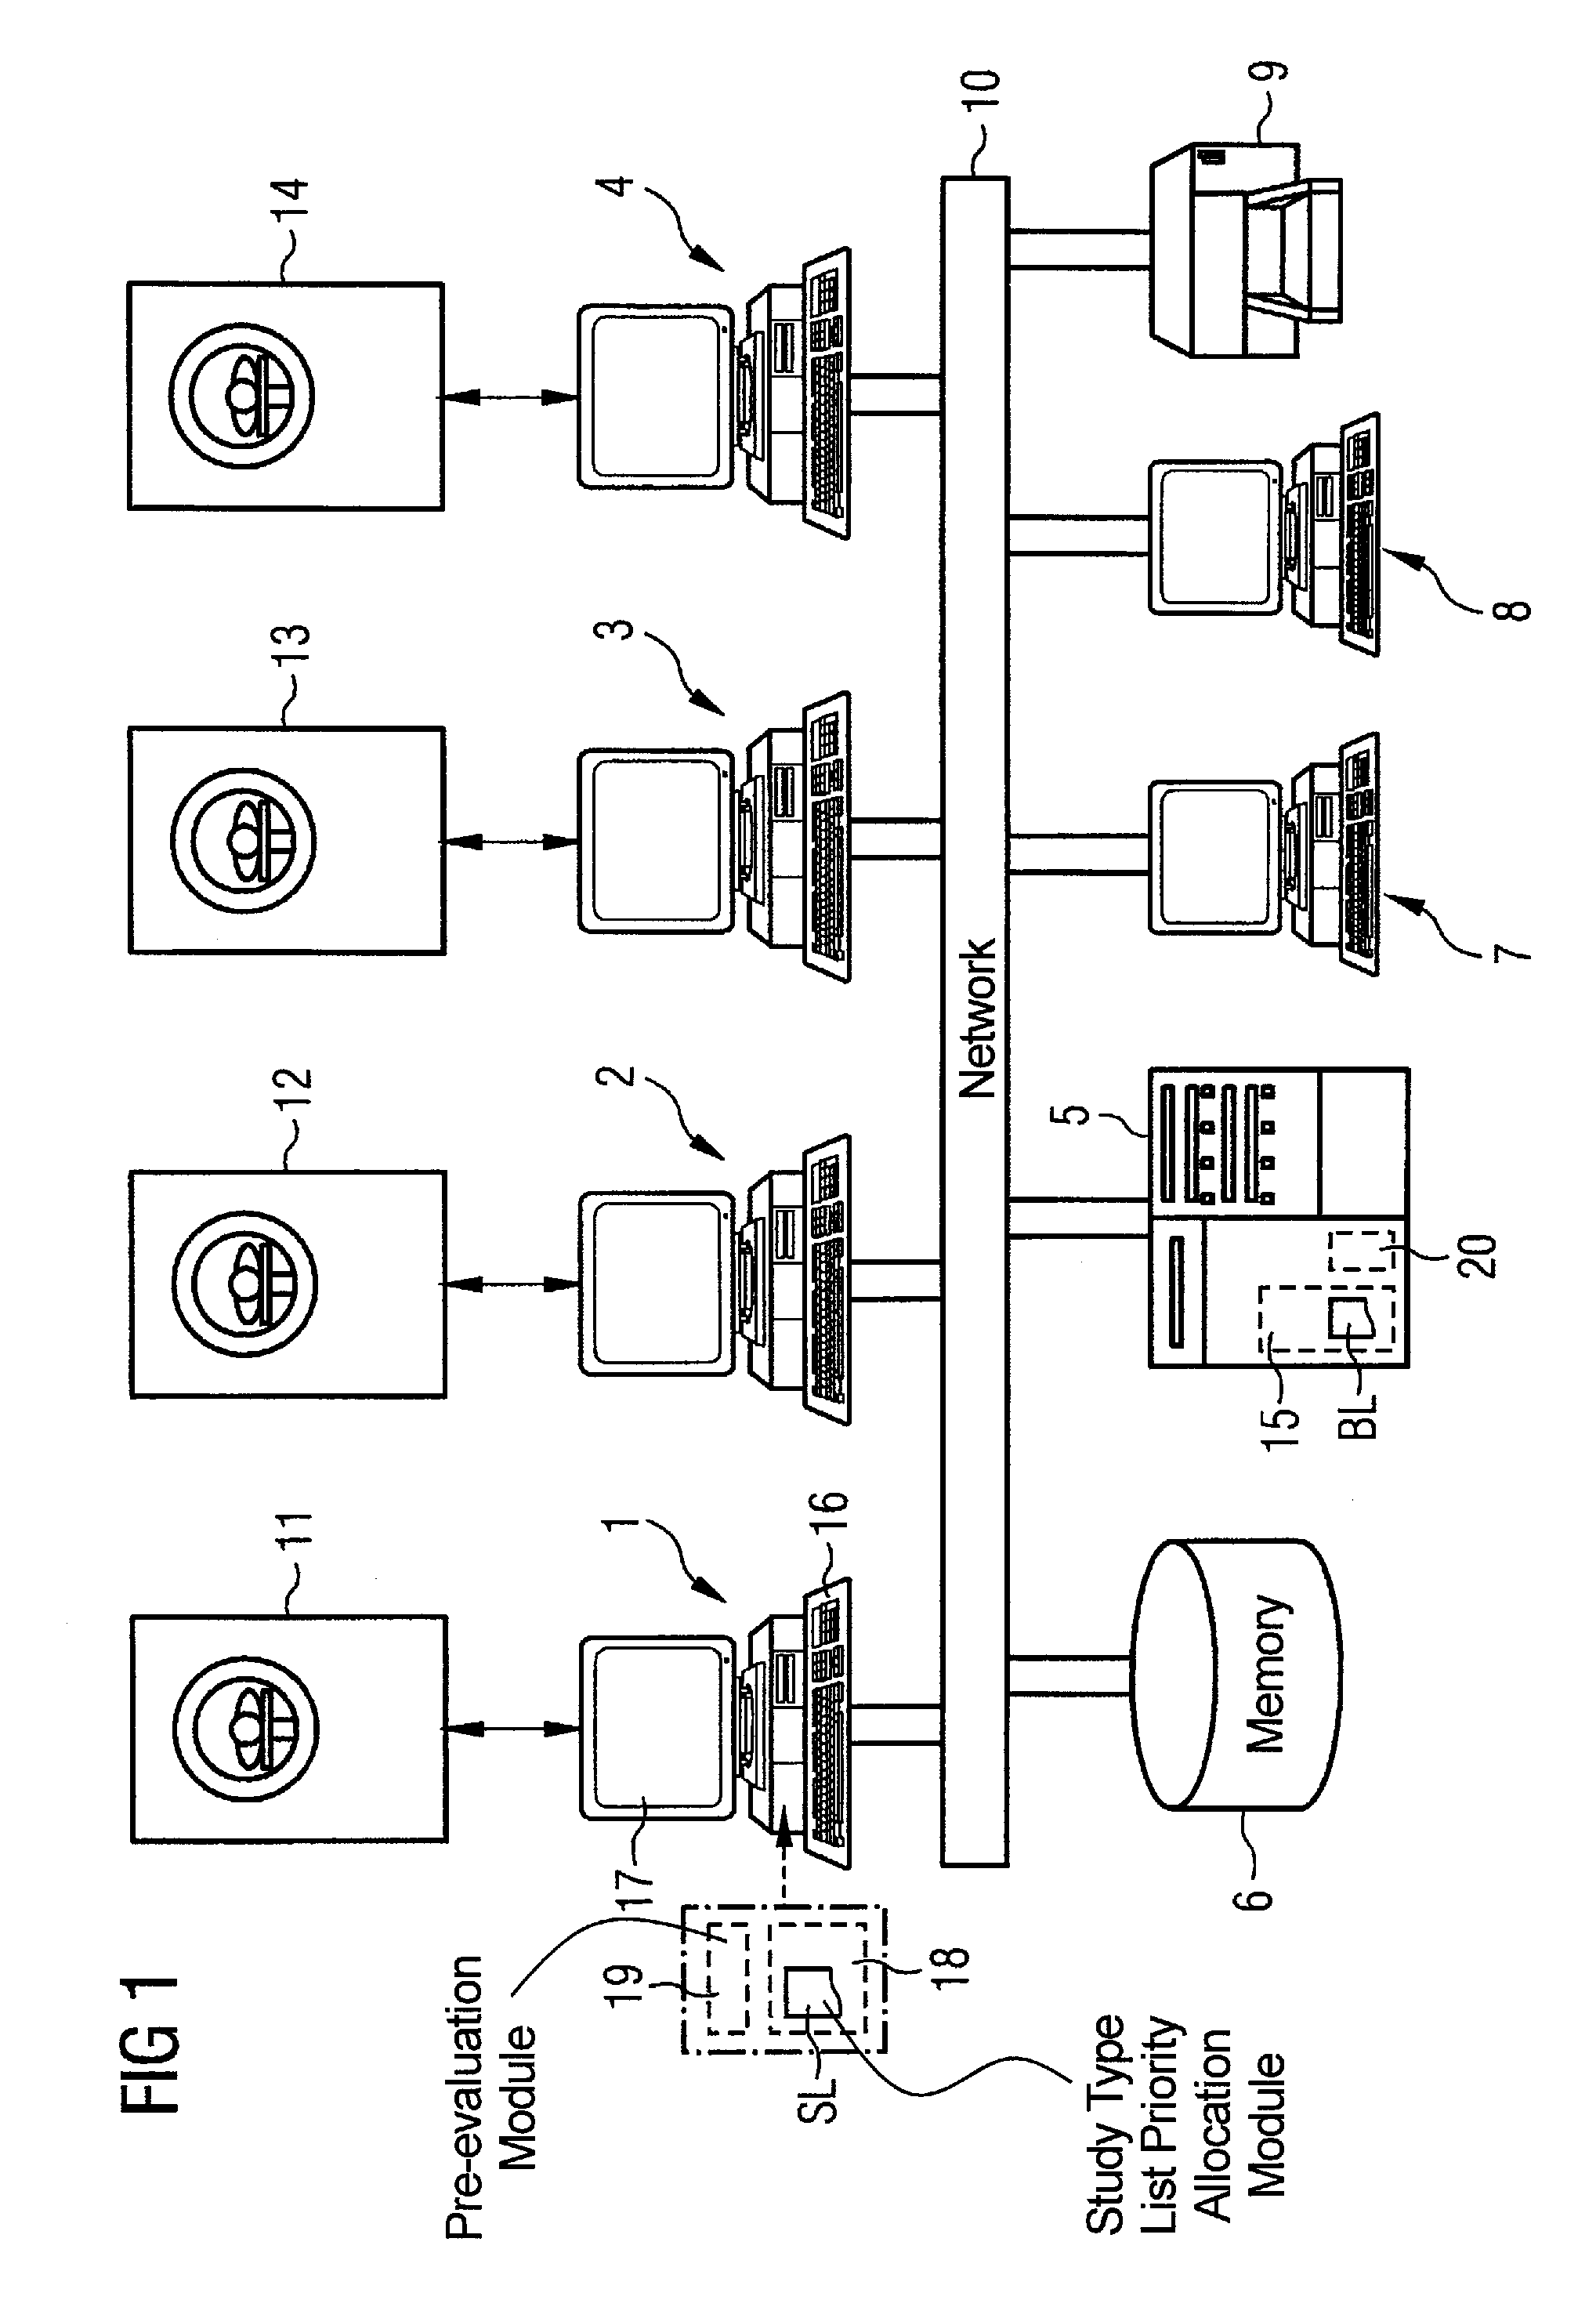 Method and computerized system for automatically processing studies acquired by an imaging examination system